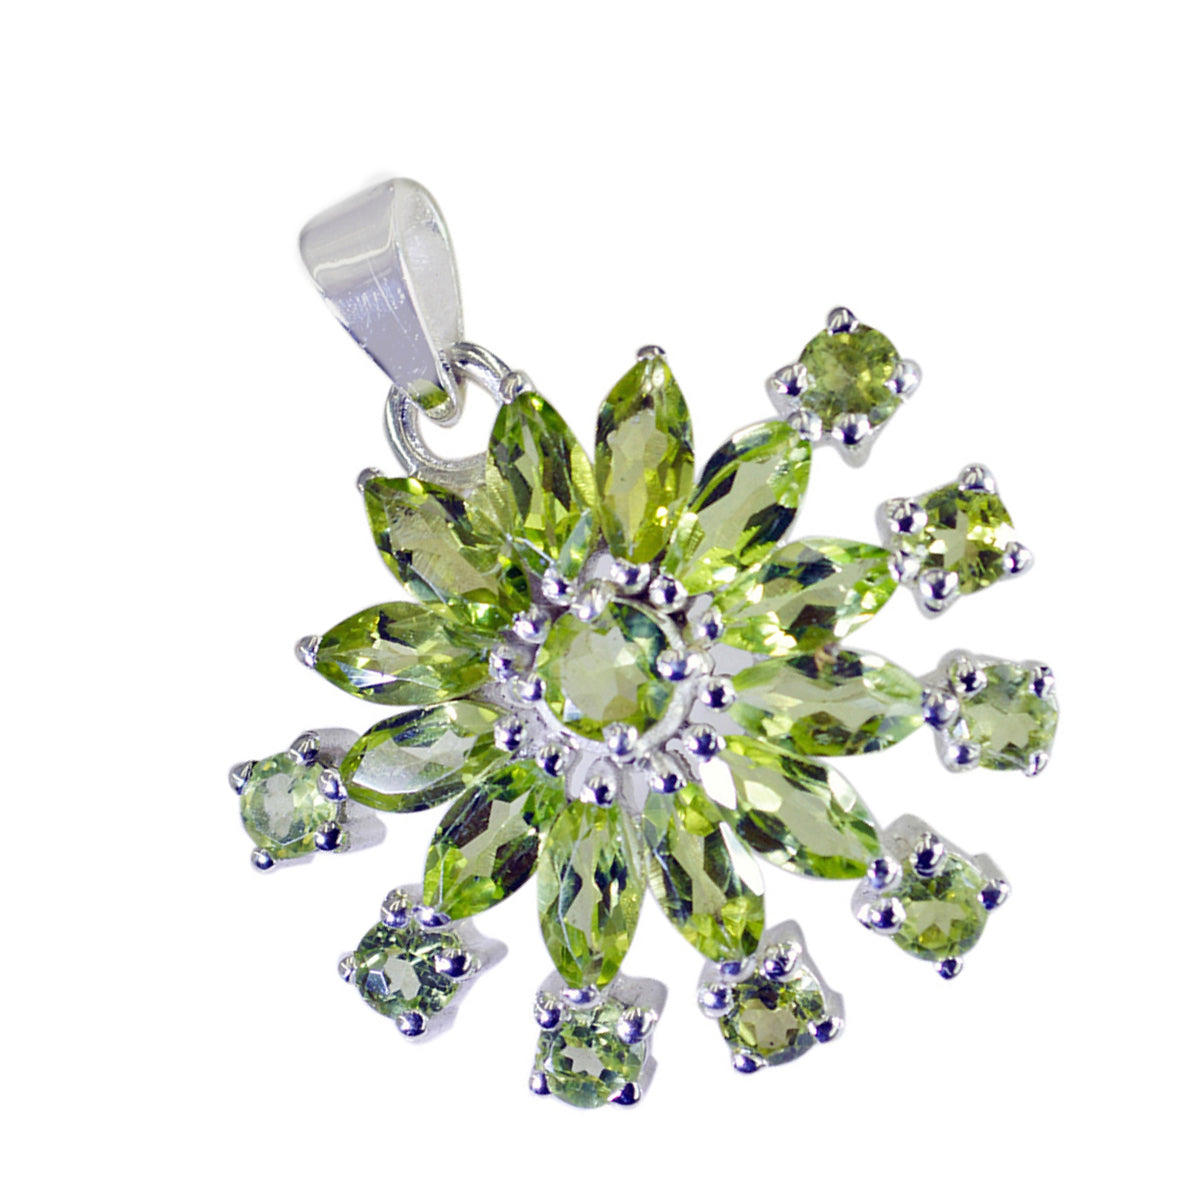 Riyo Genuine Gems Multi Faceted Green Peridot Solid Silver Pendant Gift For Easter Sunday